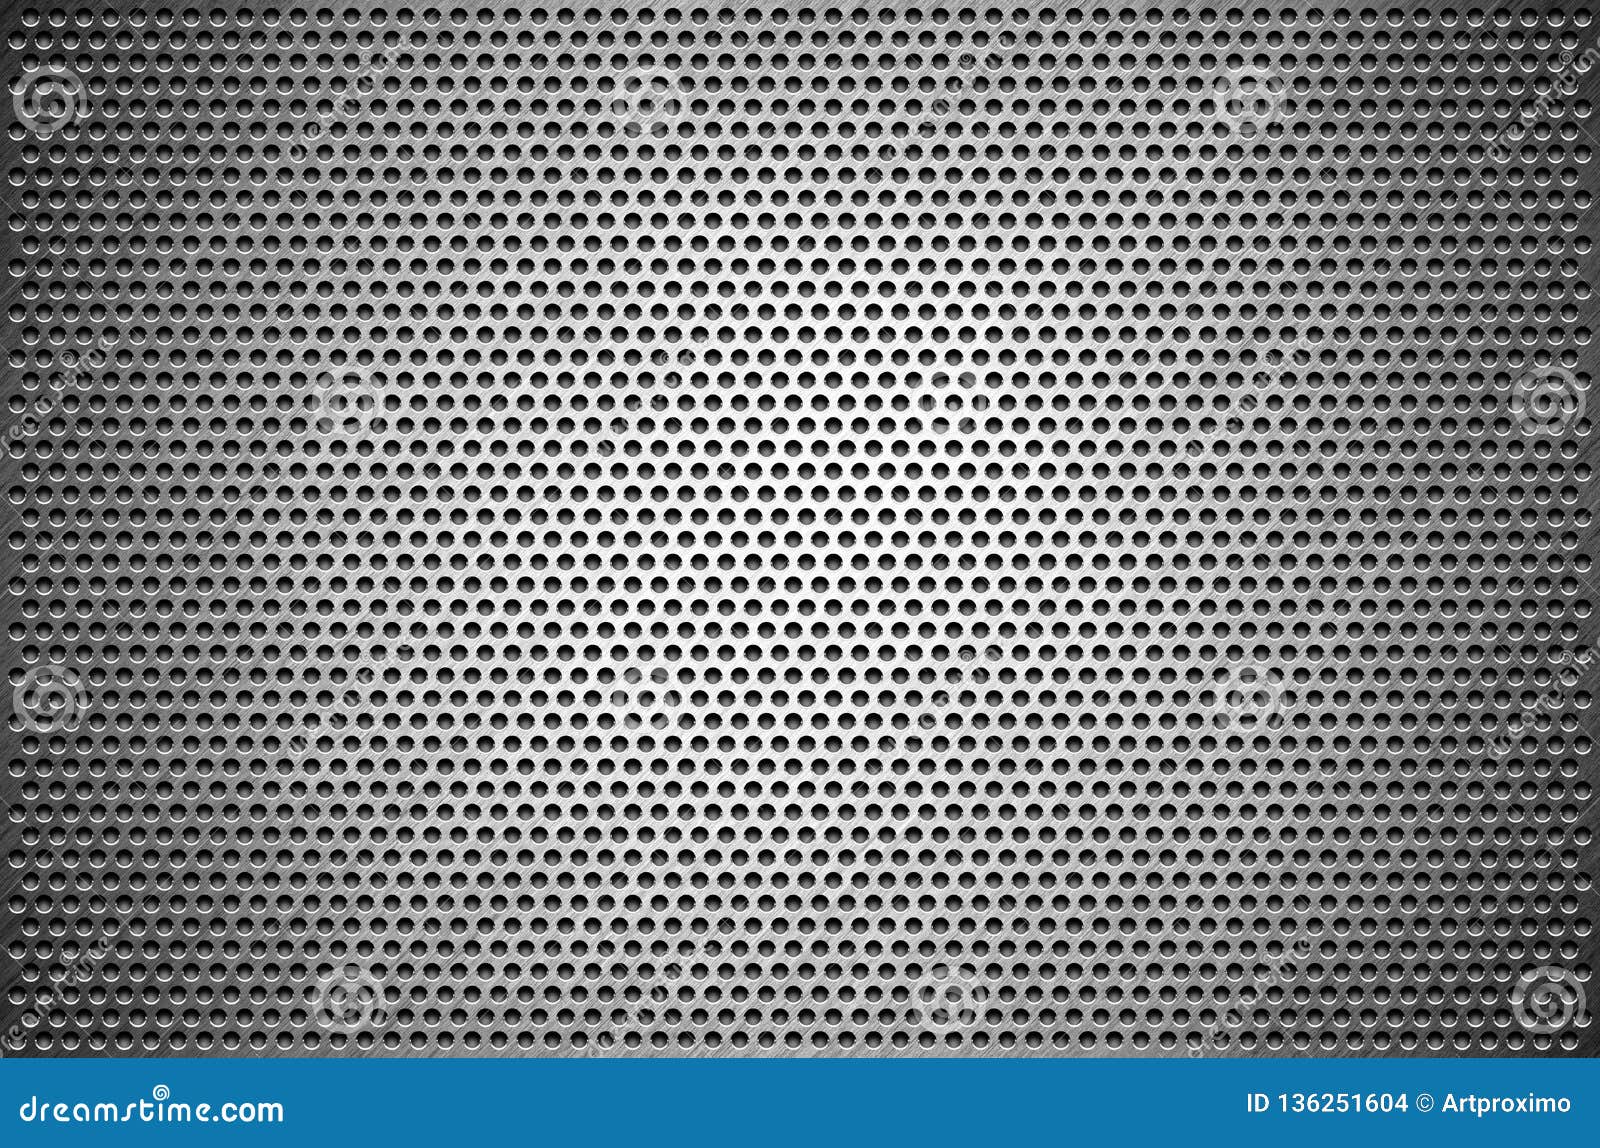 Texture Background Gray Sheet Metal Perforated. Steel Plate With Holes Stock Illustration